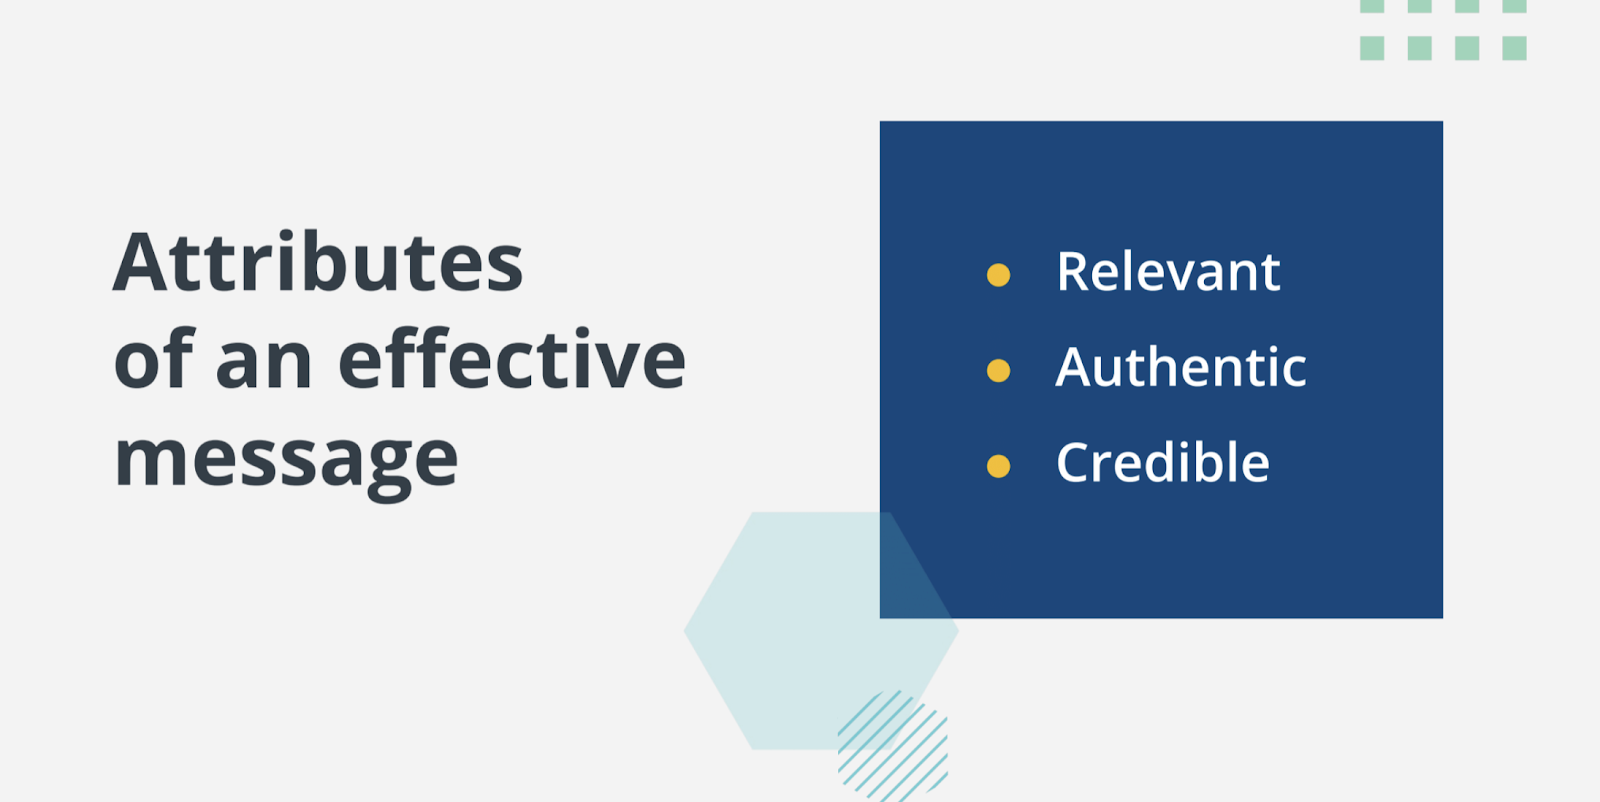 The attributes of an effective message: relevance, authenticity, and credibility.